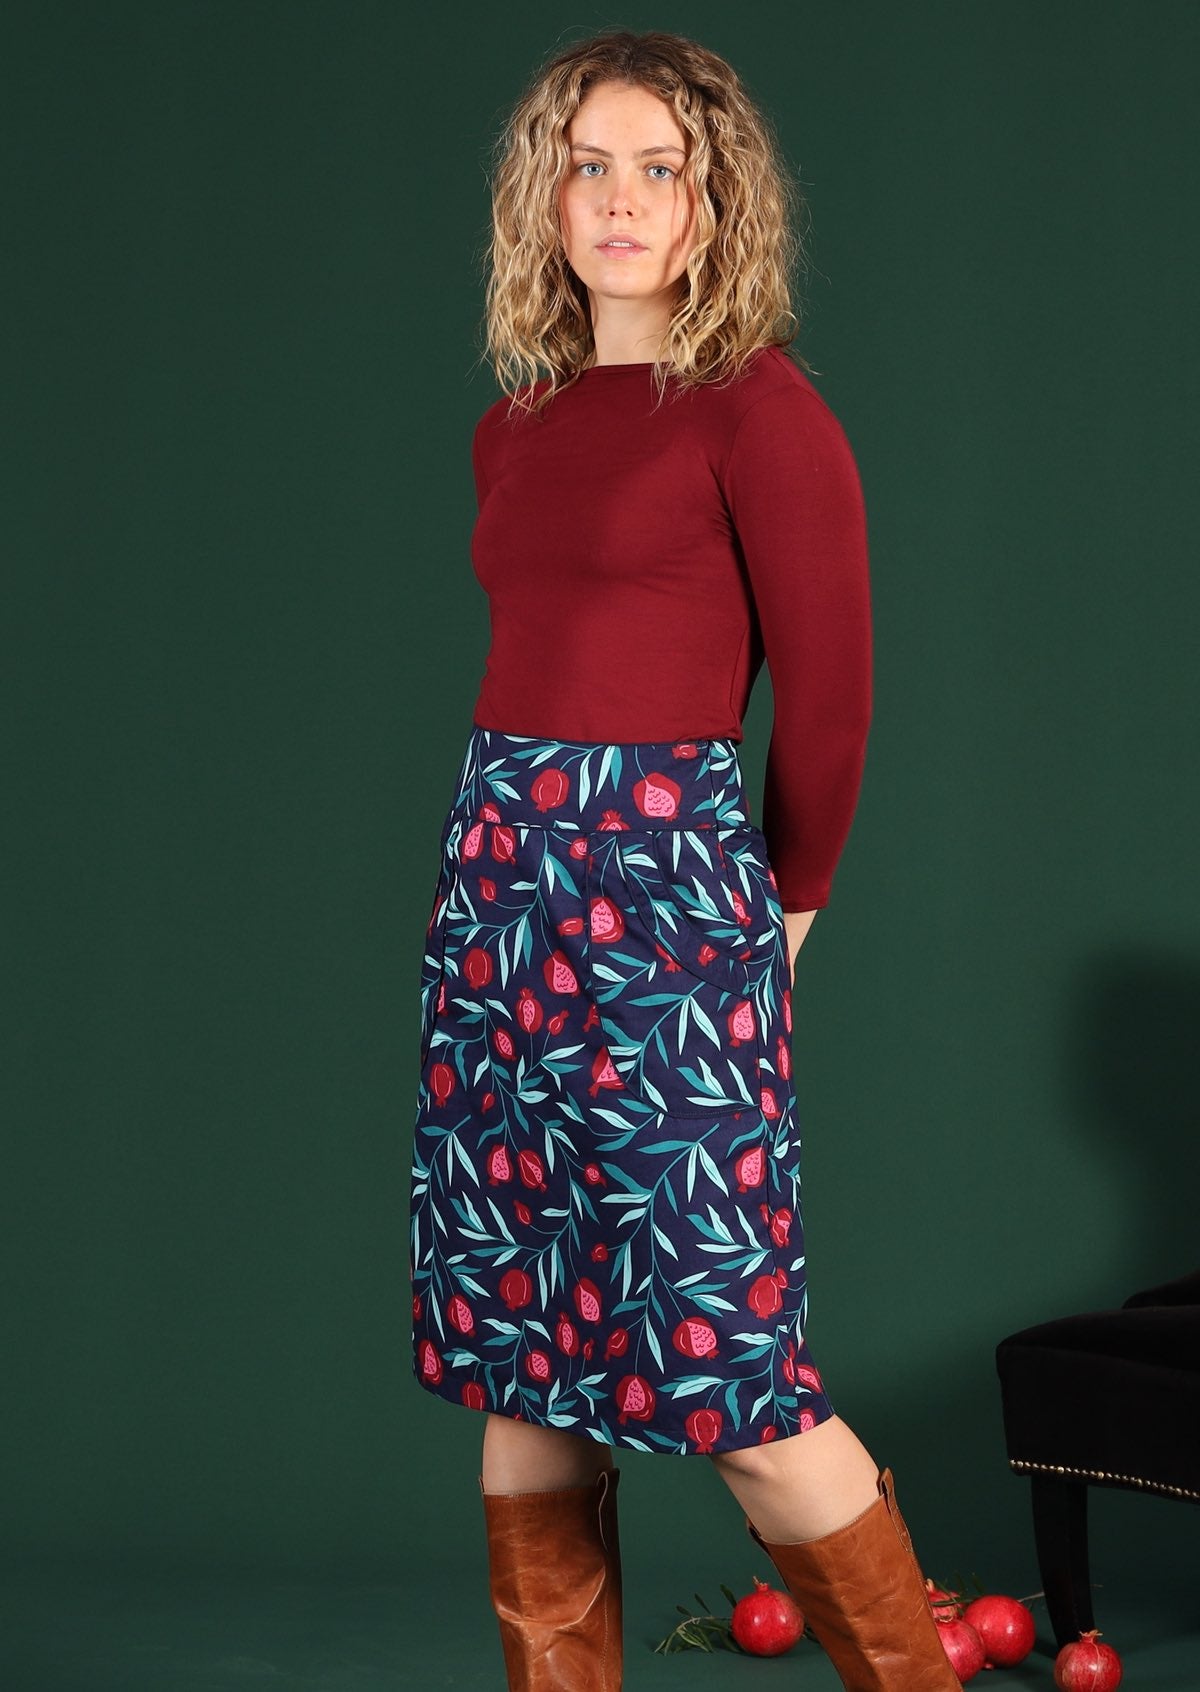 Model wears a pomegranate print retro skirt with pockets